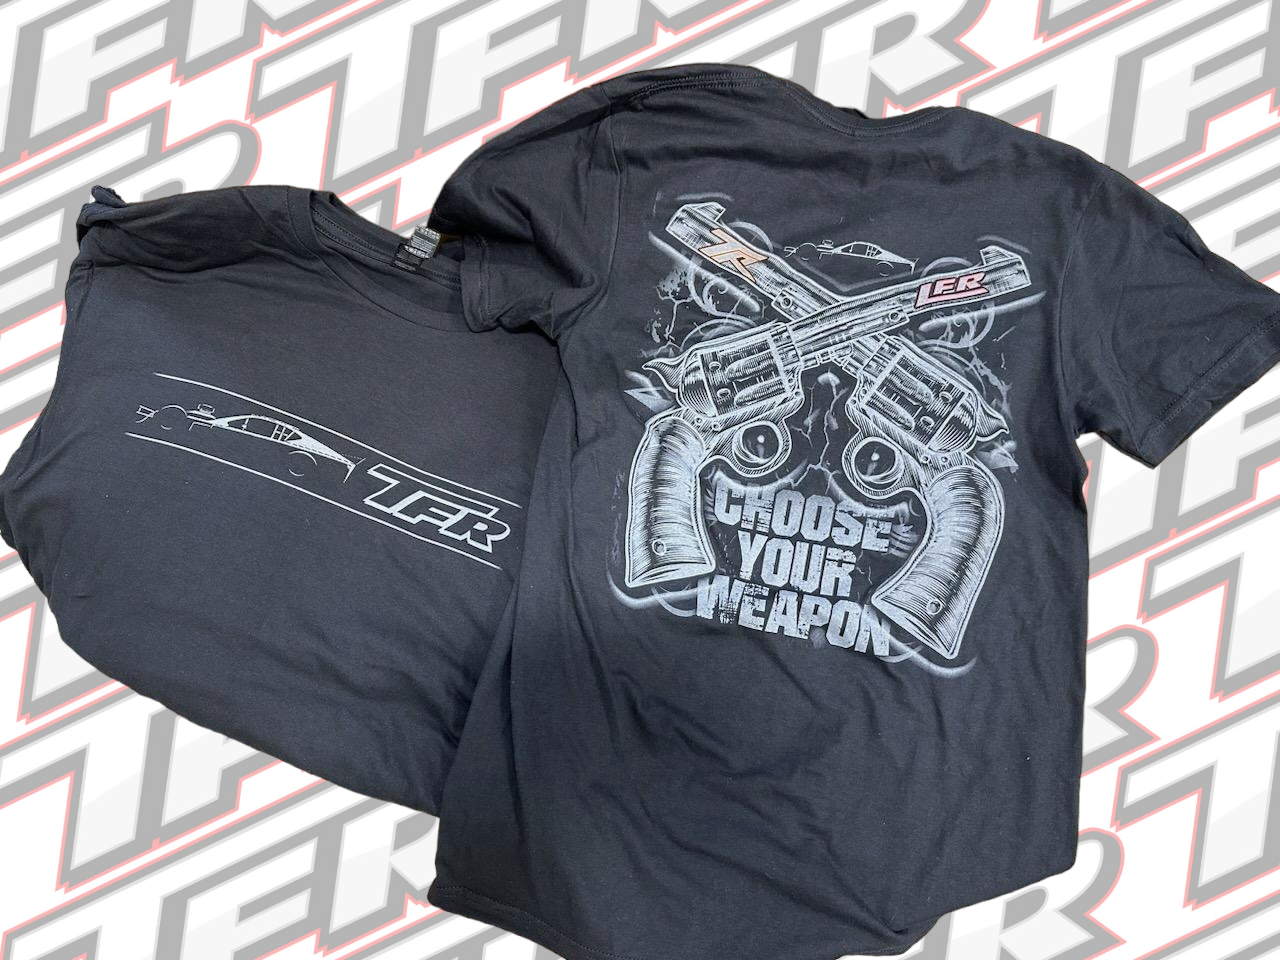 "Choose Your Weapon" T-Shirt - Limited Sizes Available!